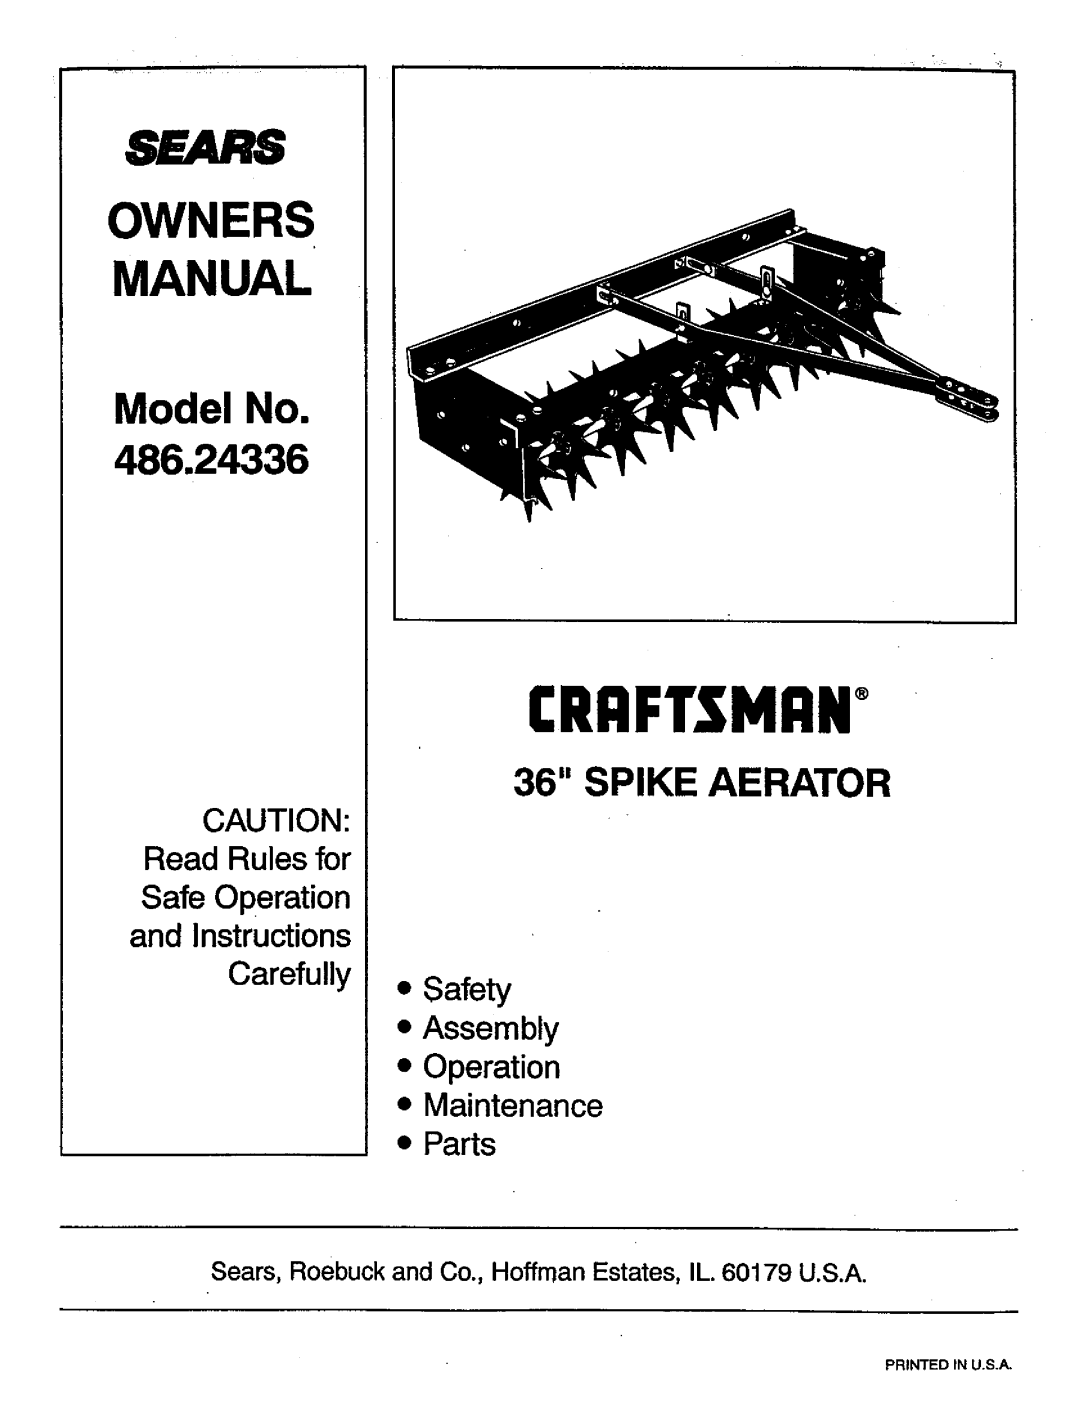 Craftsman 486.24336 owner manual Model No, Craftsman, Spike Aerator, Read Rules for Safe Operation and Instructions 